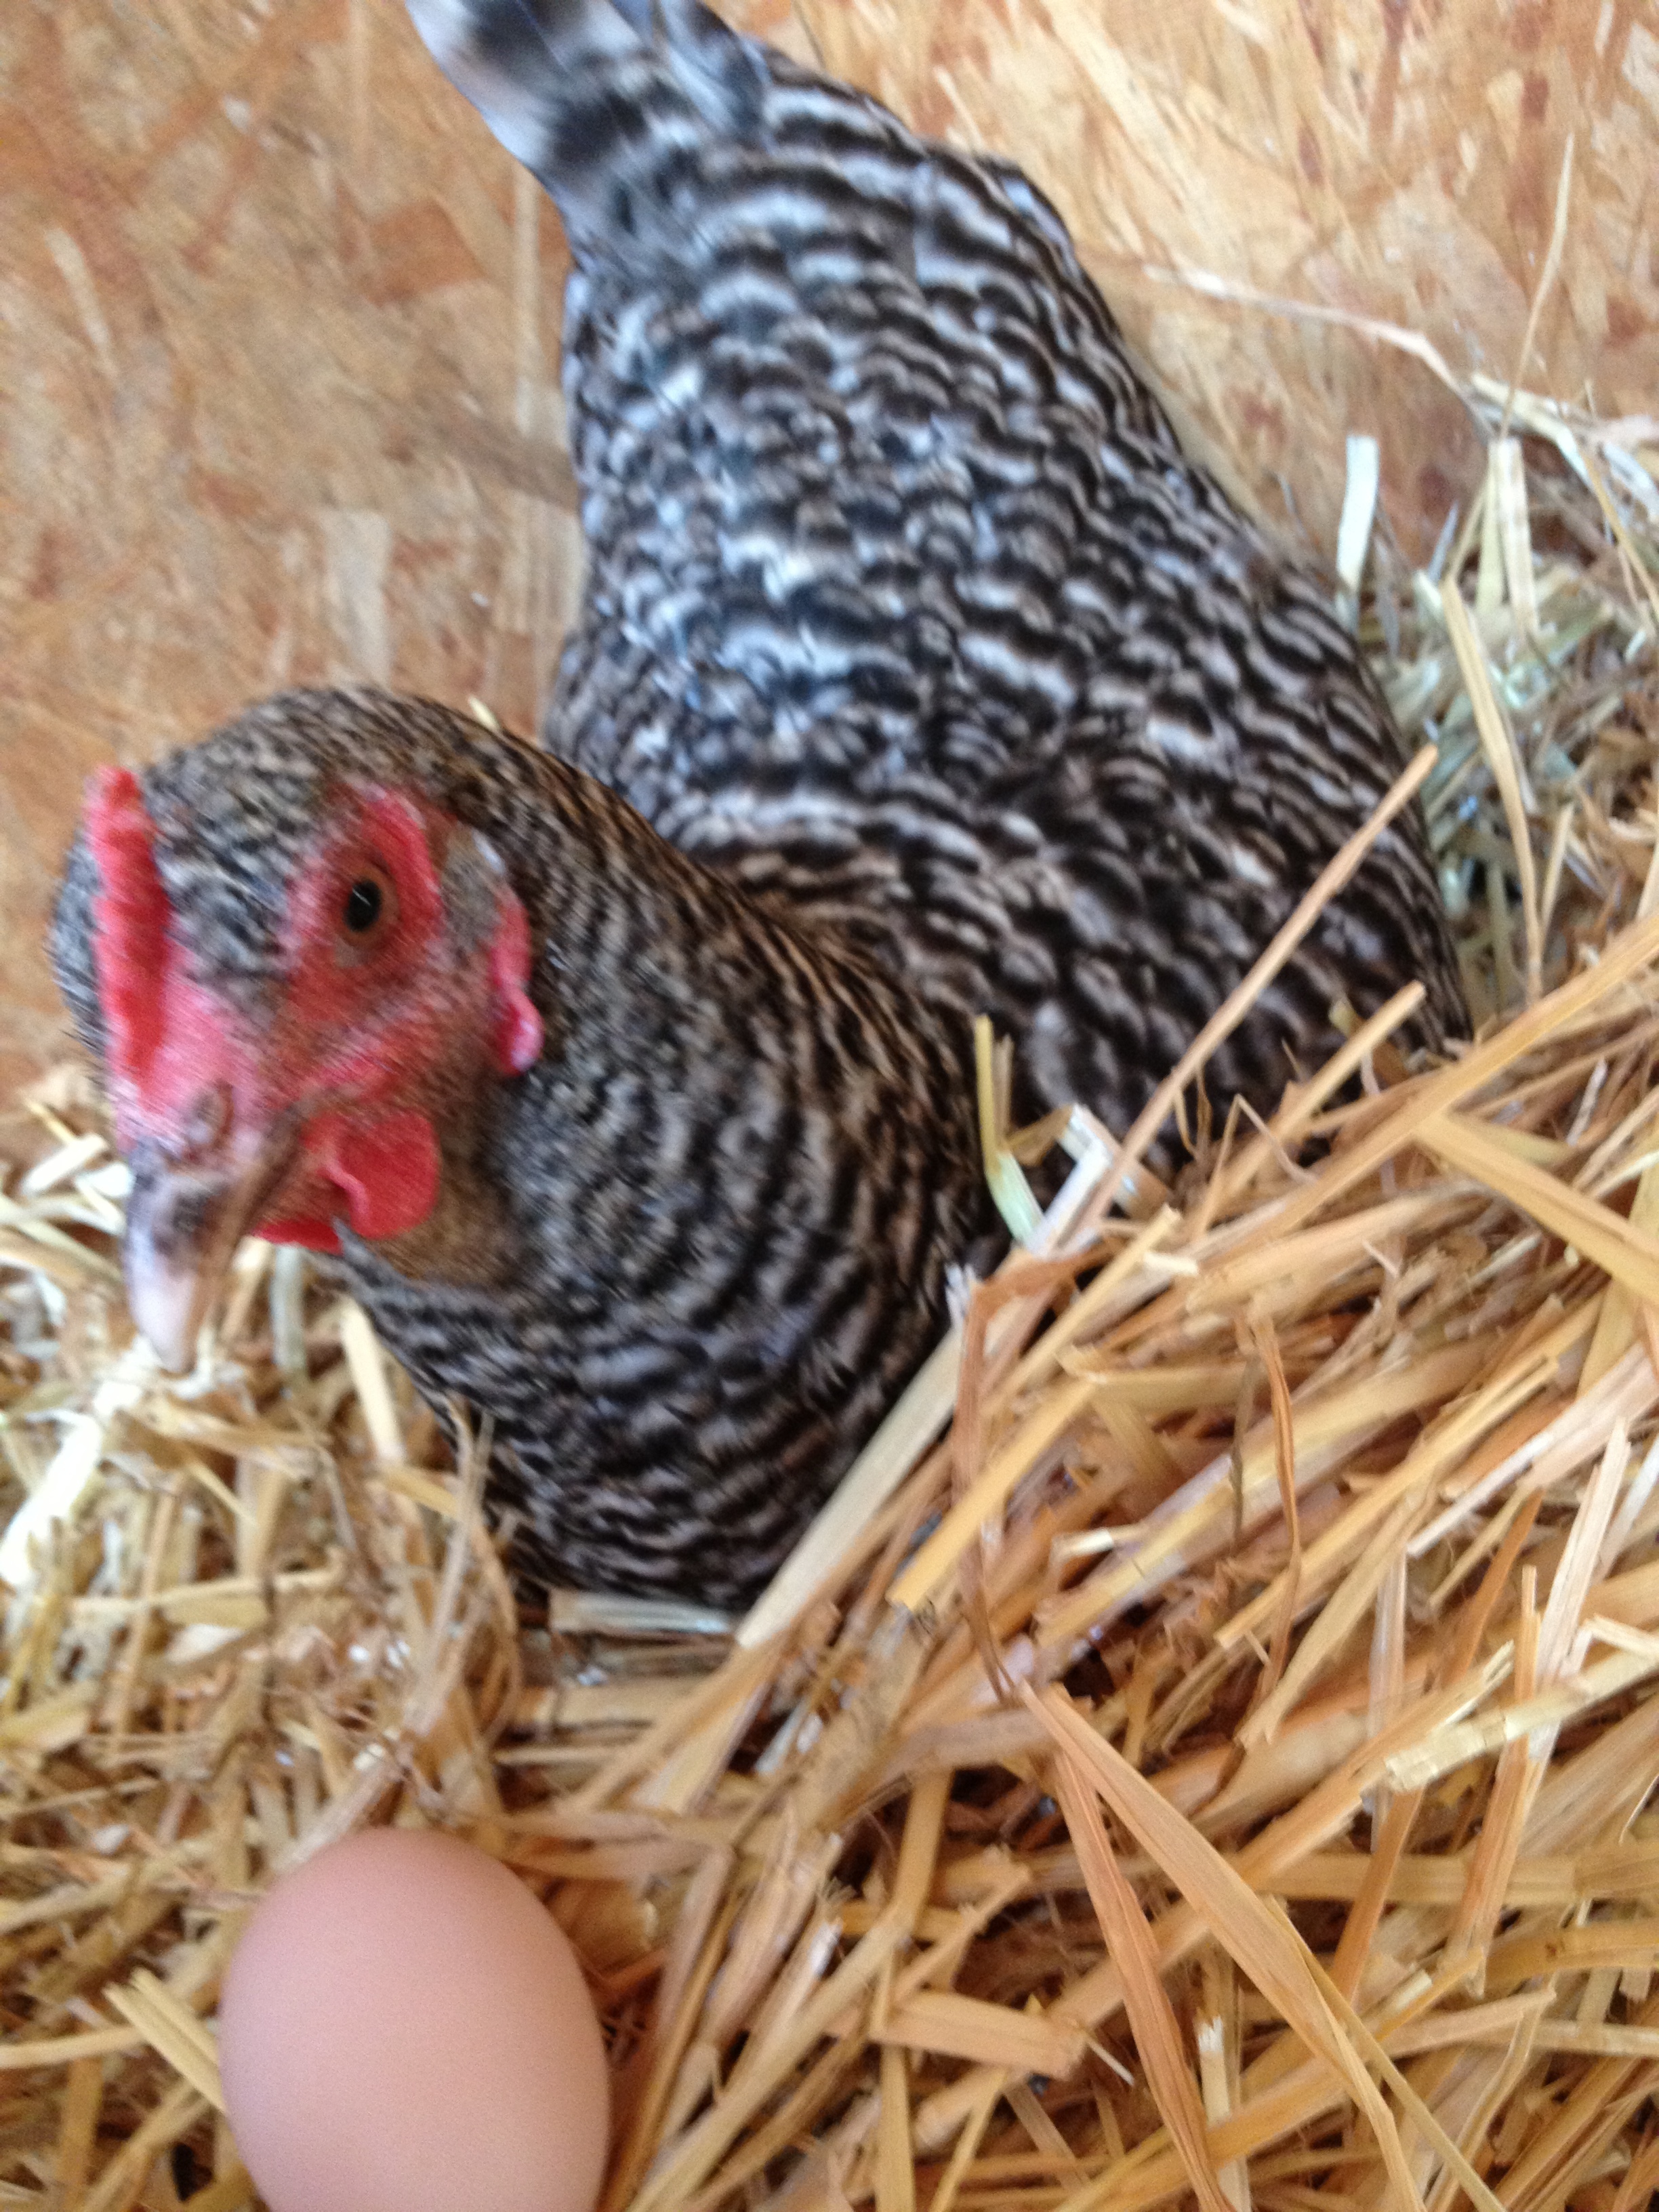 My Plymouth Barred Rock hen named "Pea Hen"